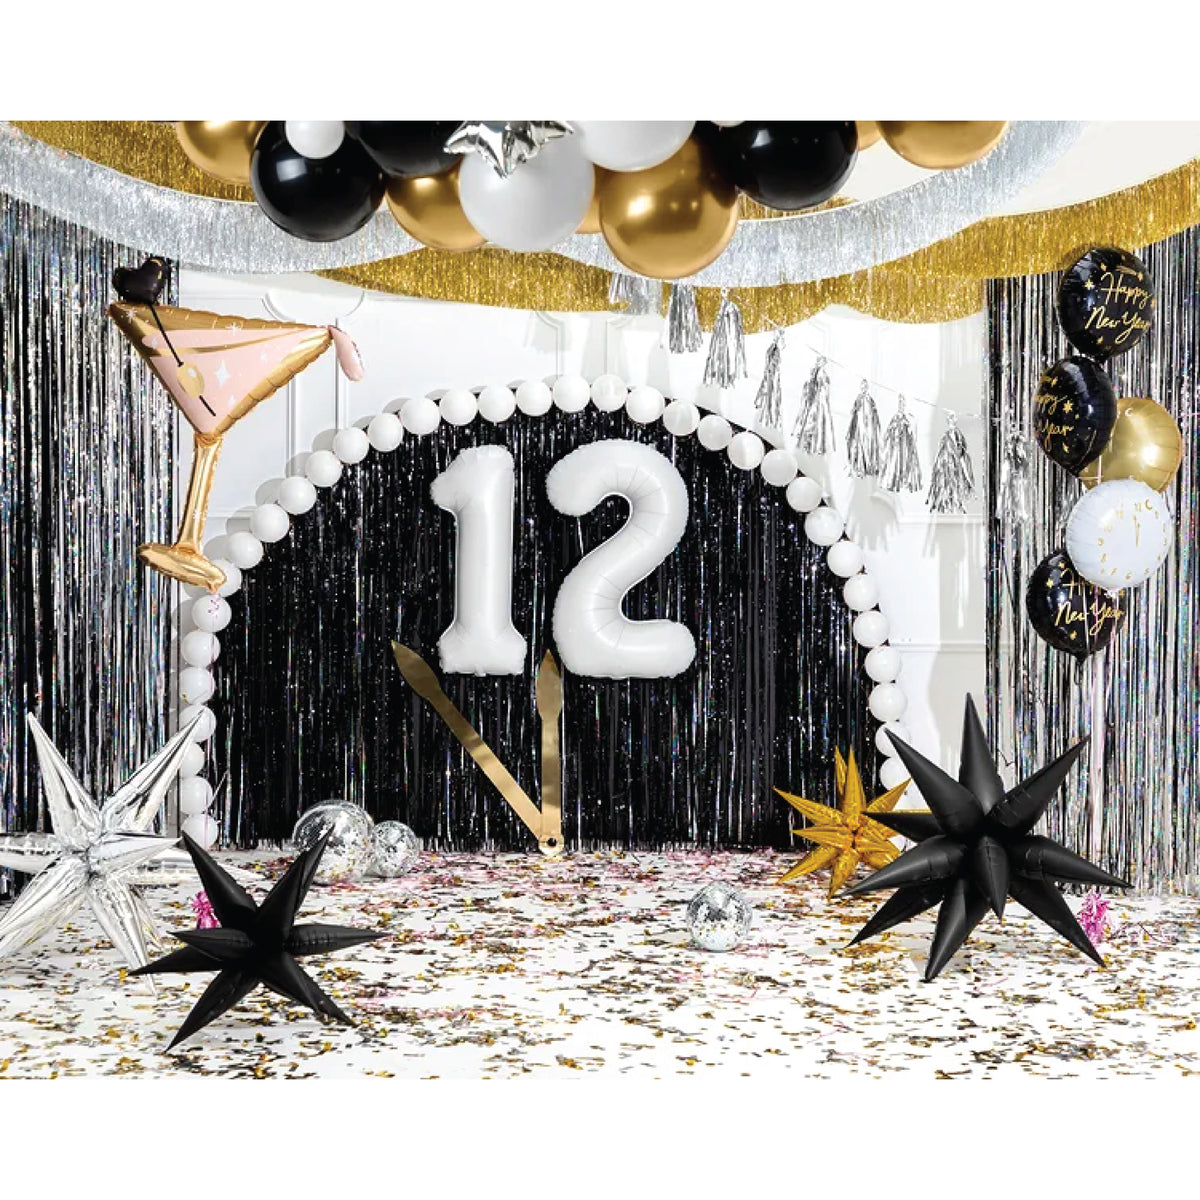 Deloklte Football Happy 12th Birthday Cake Topper - Football/Sport Theme  Birthday Party Decorations for Boys - 12 Years Birthday Party Supplies,  Gold